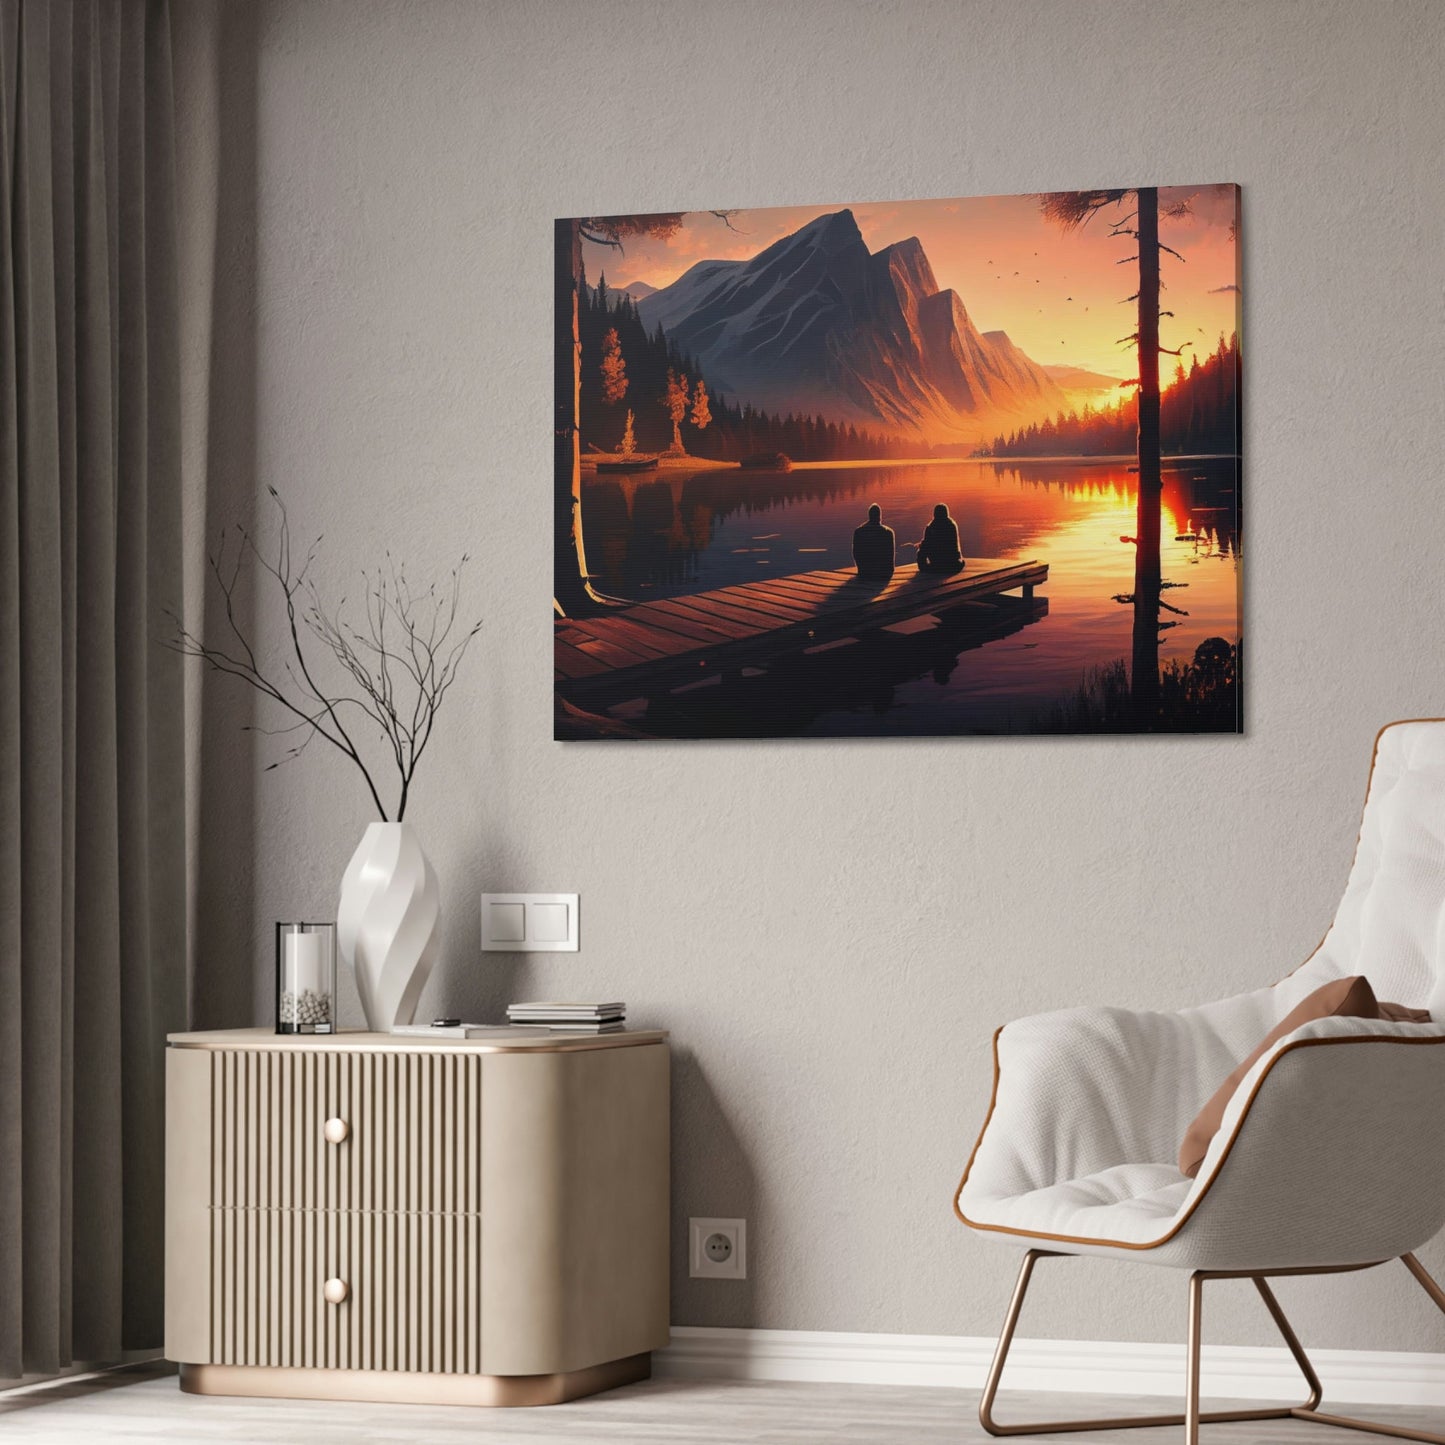 Peaceful Lakeshore: Framed Poster of a Calm Lake Scene on Canvas